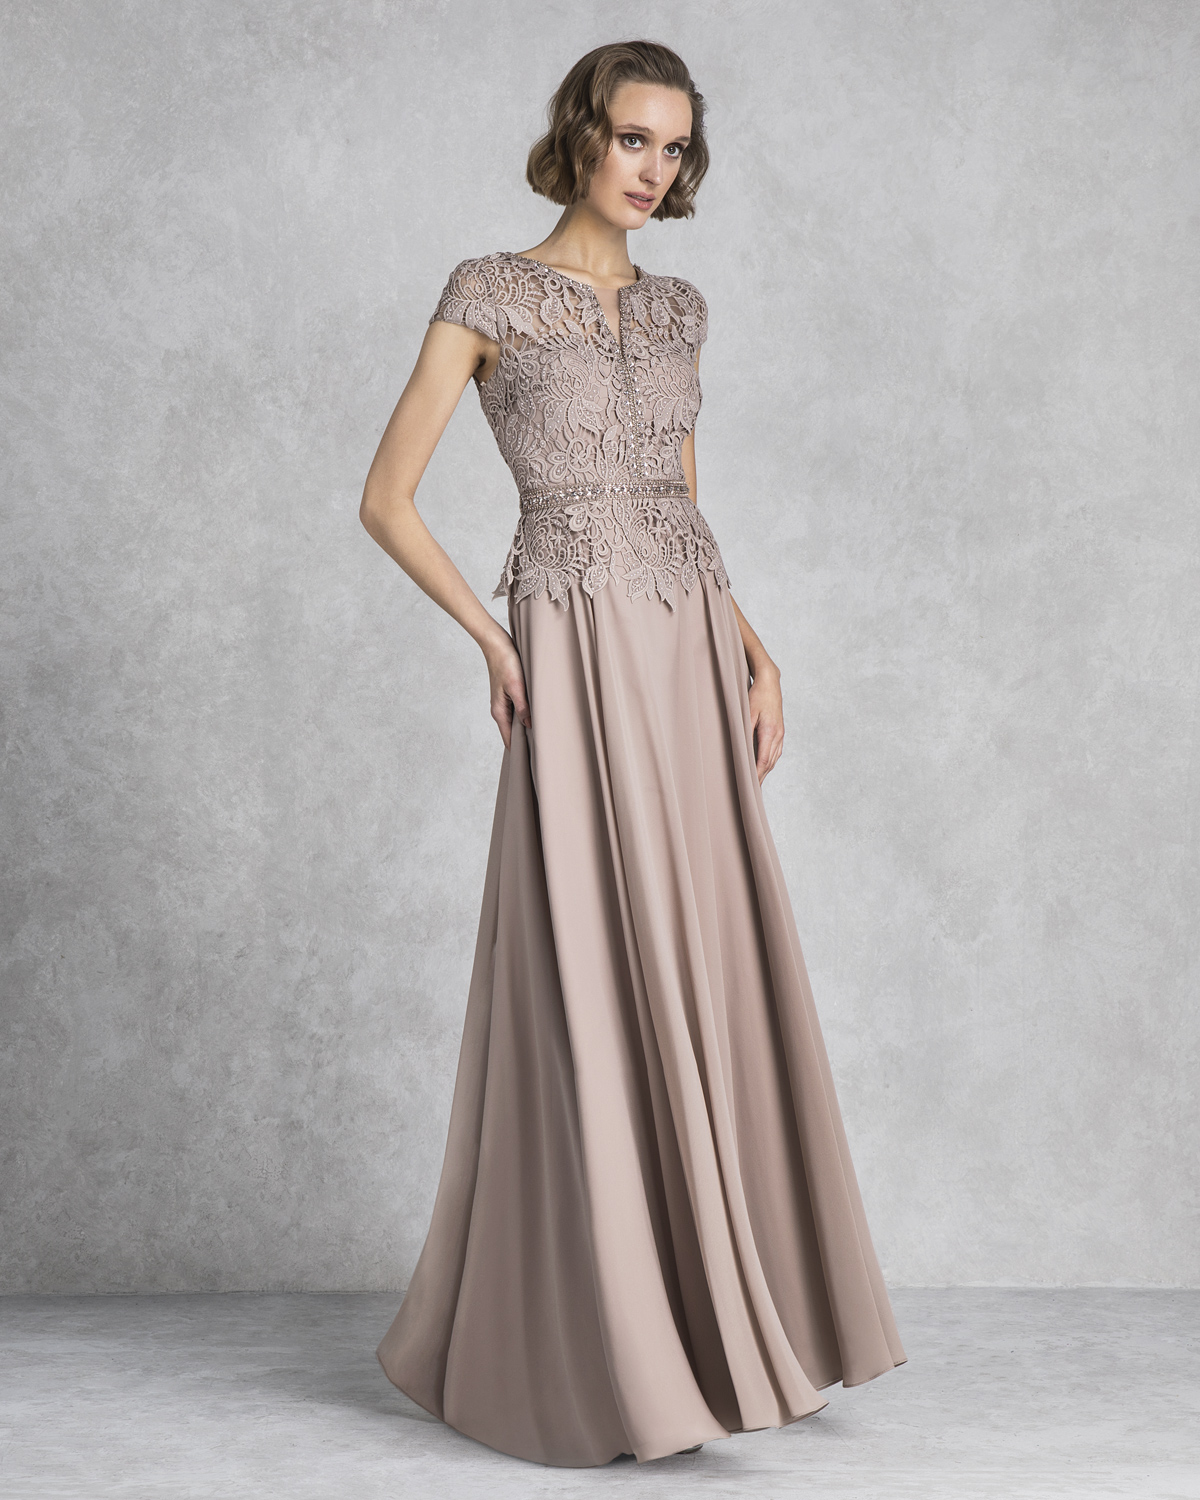 Классические платья / Long evening dress for the mother of the bride with lace top and satin skirt